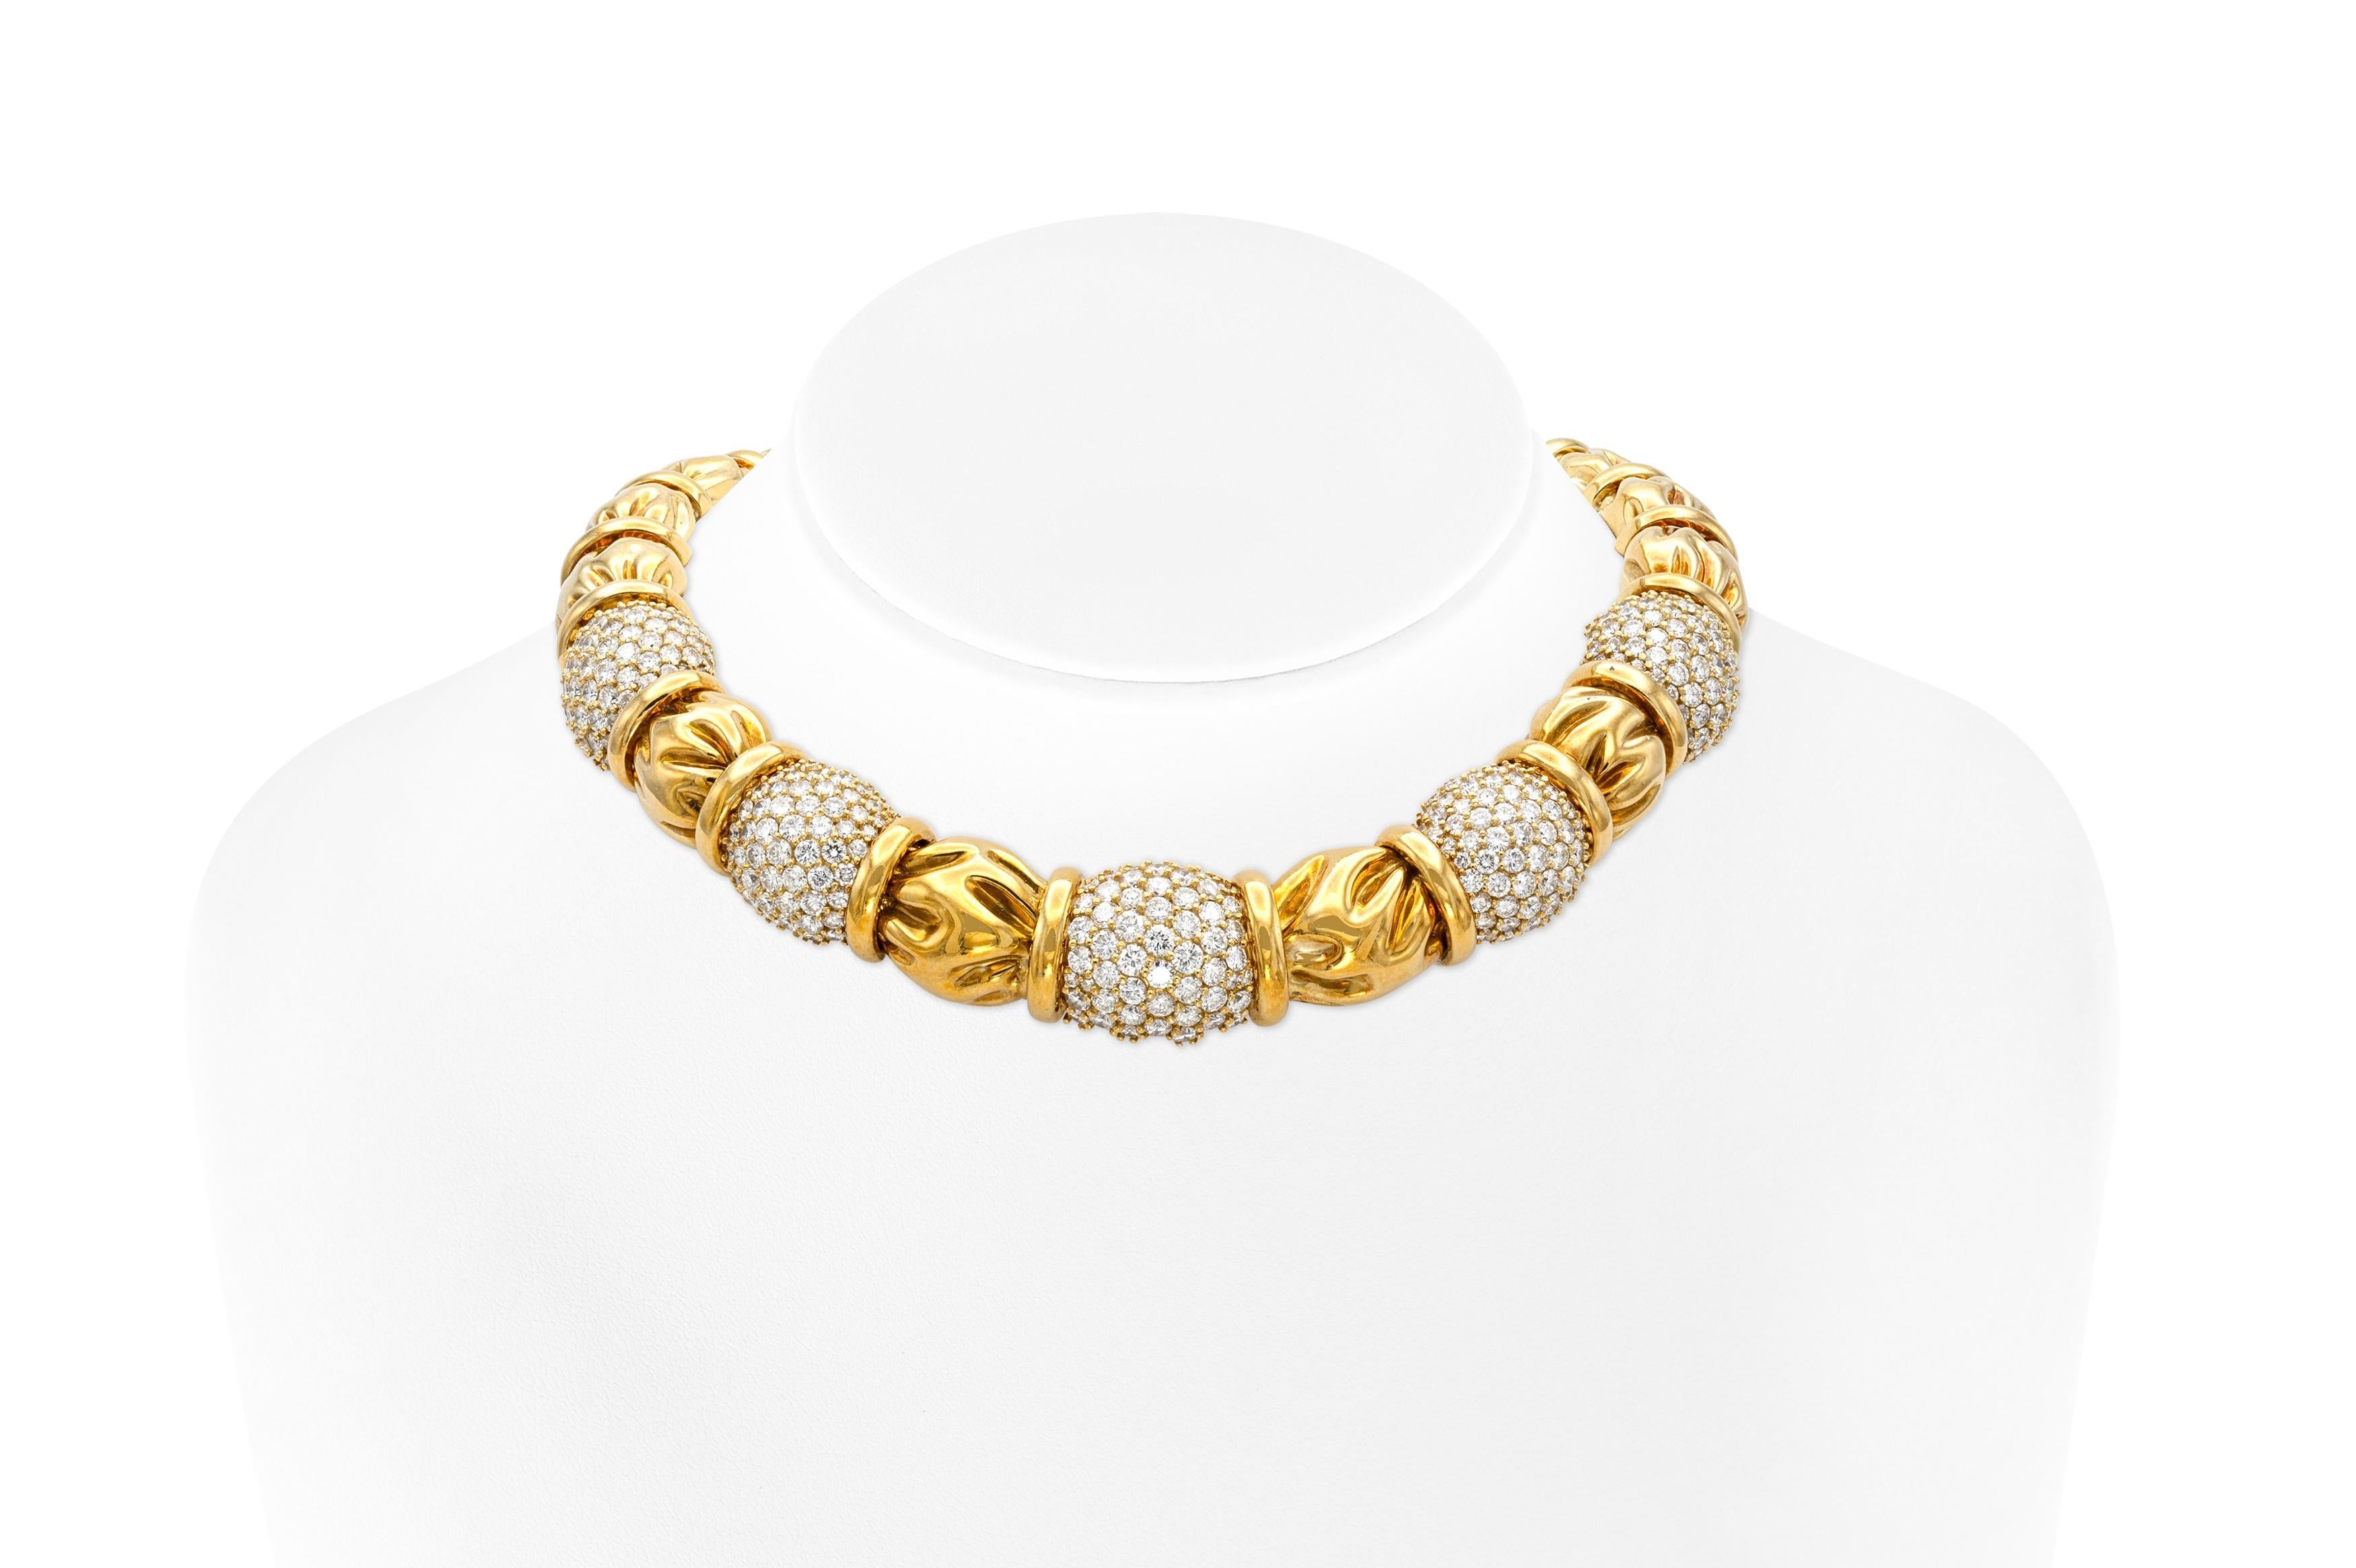 Finely crafted in 18k yellow gold with Round Brilliant cut Diamonds weighing approximately a total of 20.00 carats.
Signed by Jose Hess
Circa 1960s
15 inches long